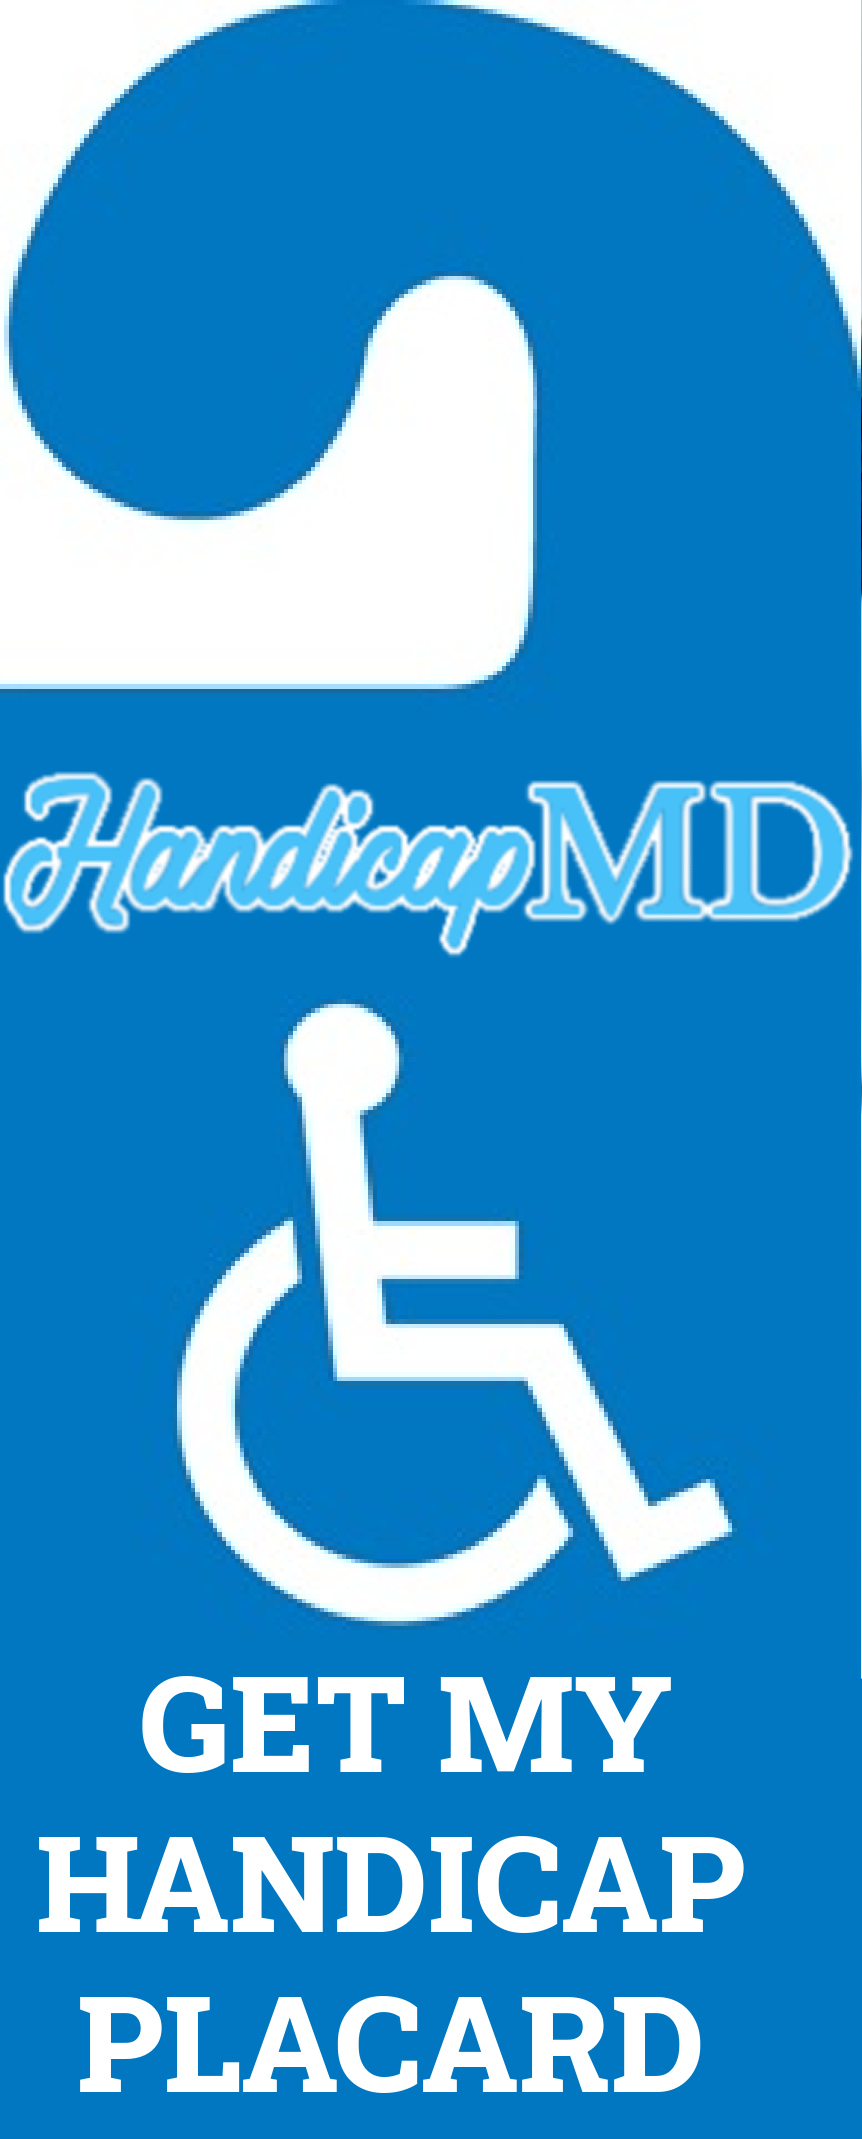 Handicap Placard Violations and Penalties in New Mexico: What You Need to Know